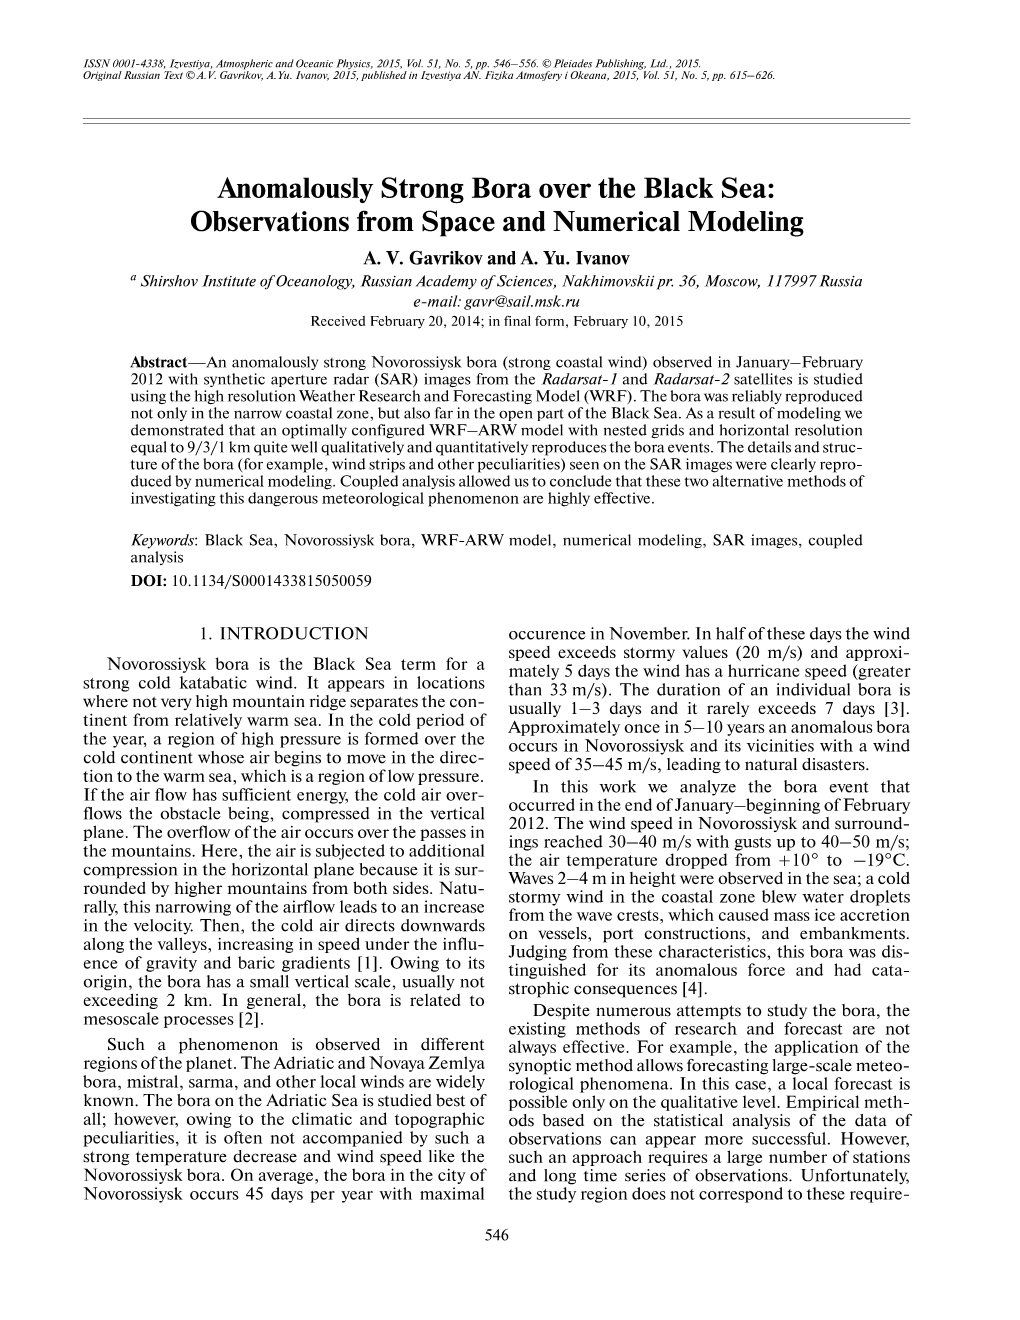 Anomalously Strong Bora Over the Black Sea: Observations from Space and Numerical Modeling A